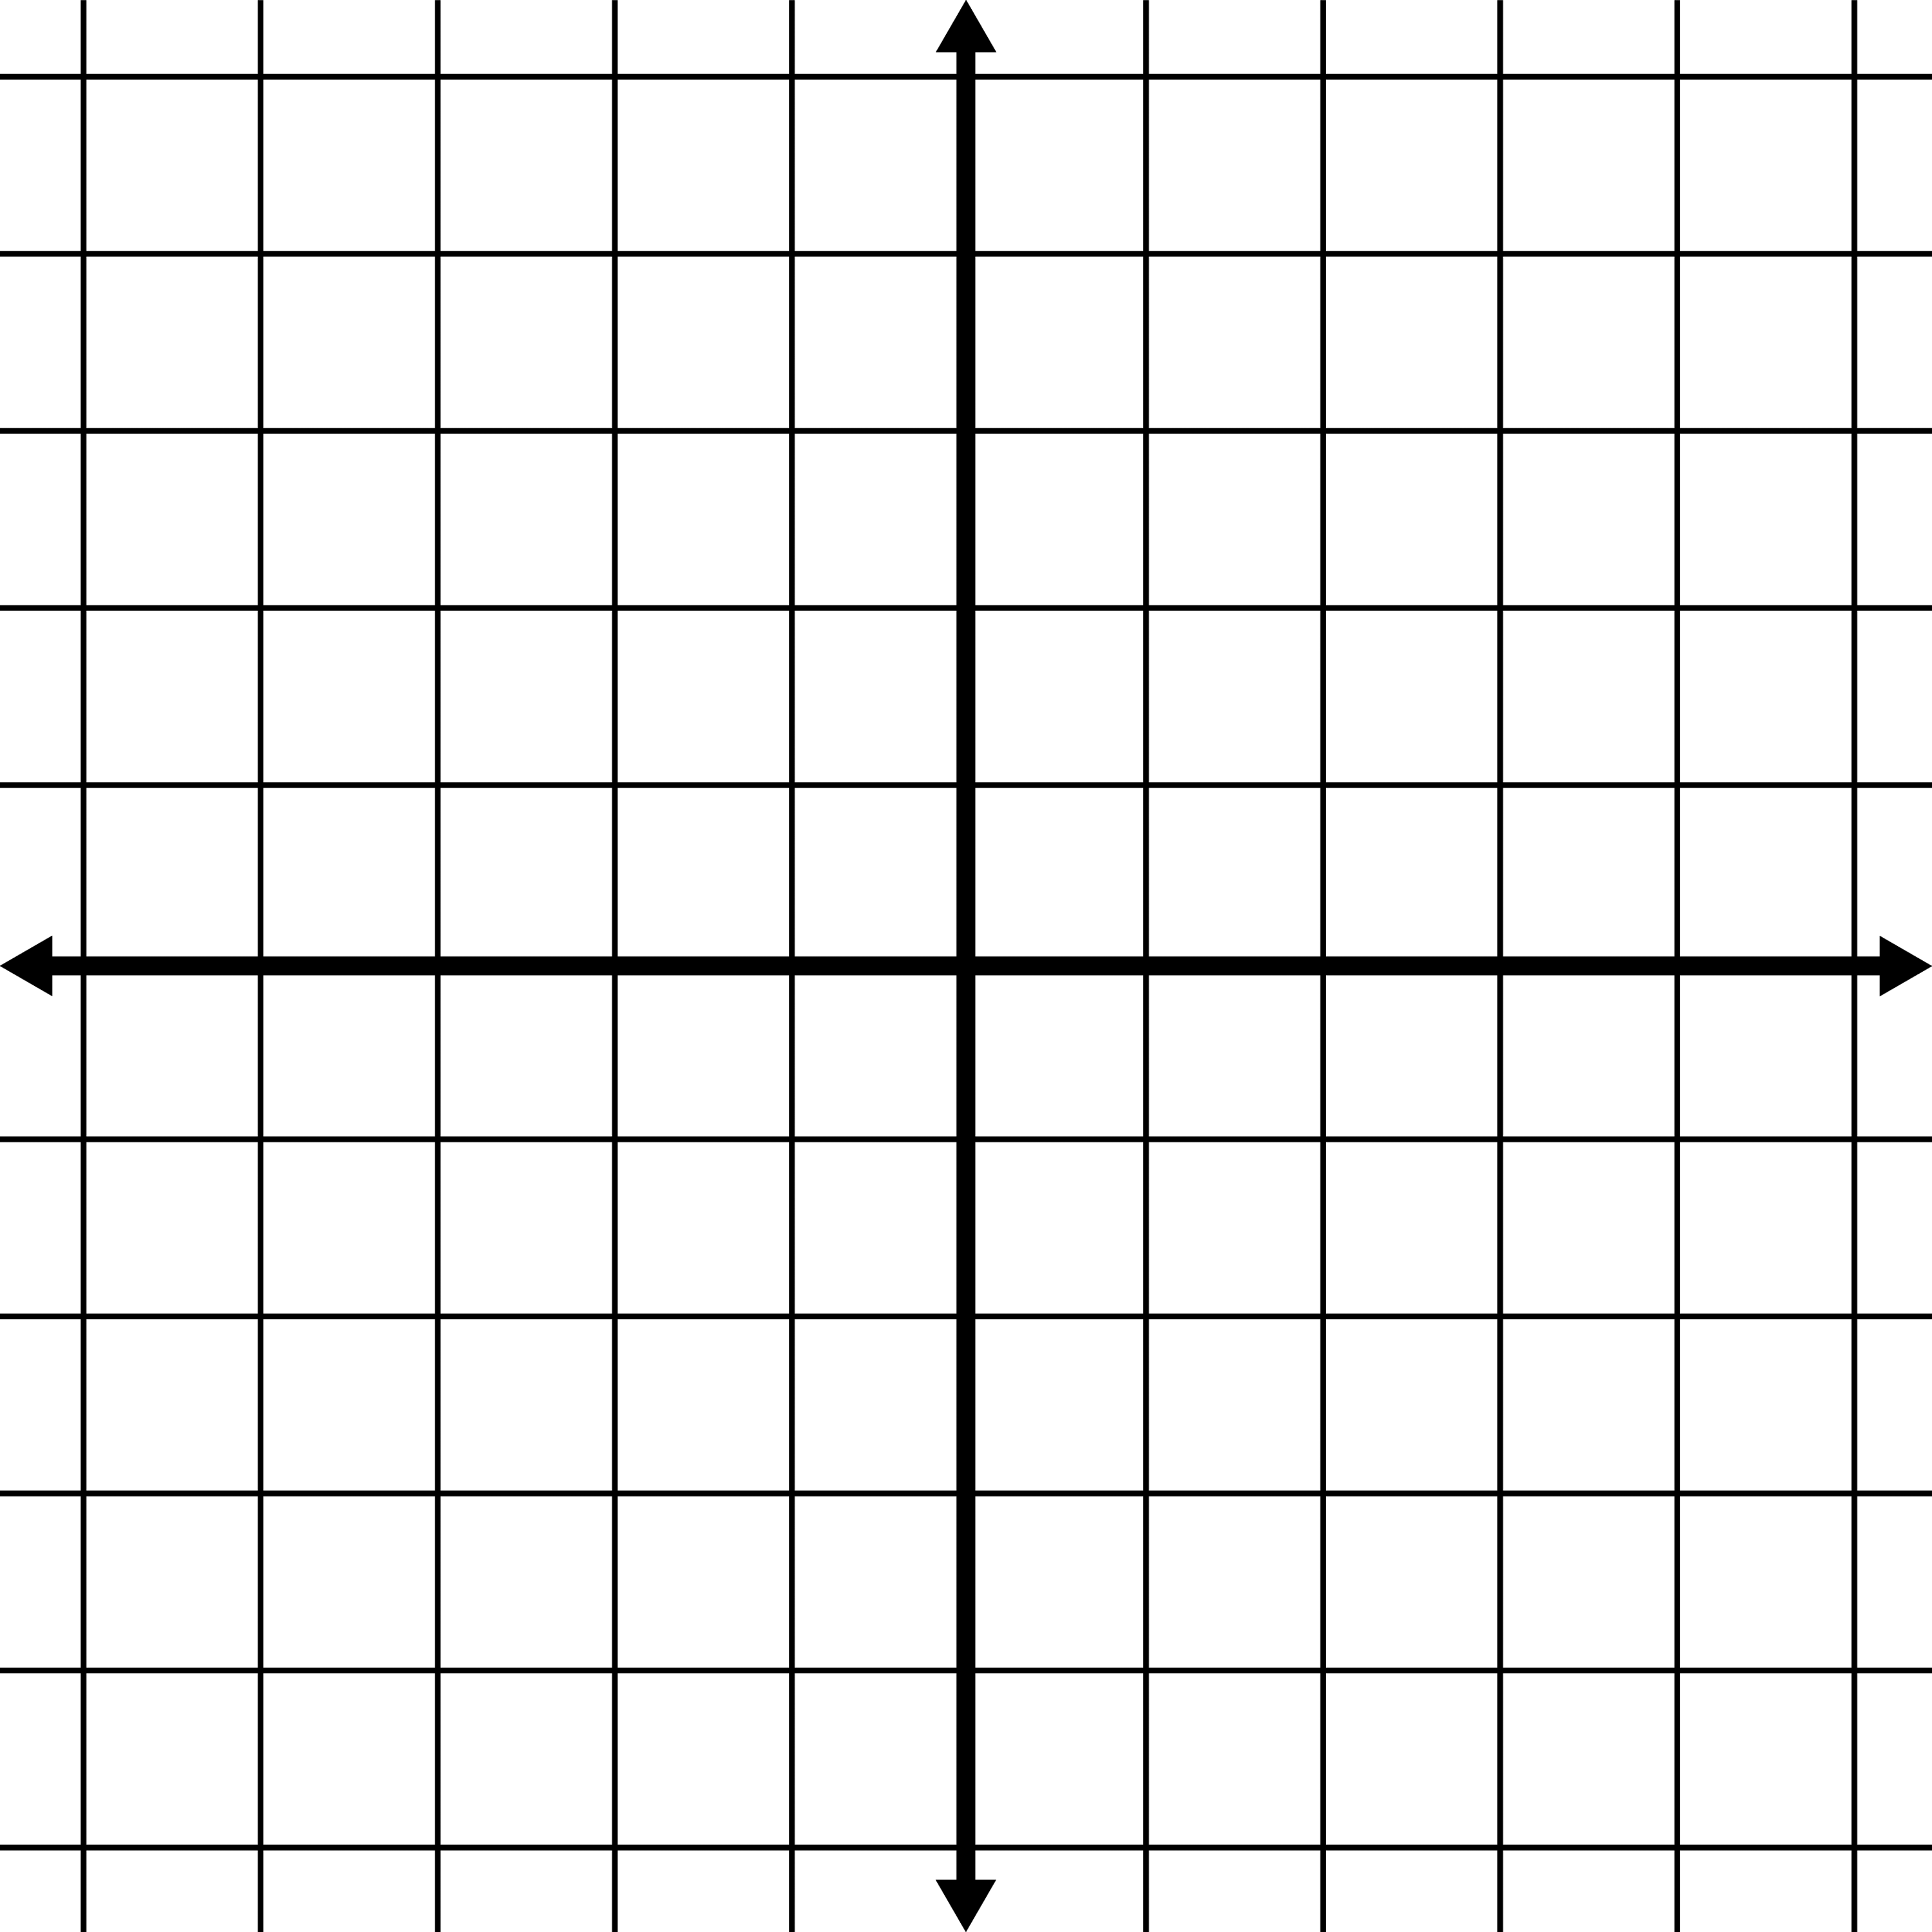 Art Worksheets Blank Coordinate Grid With Grid Lines Shown Clipart | My ...